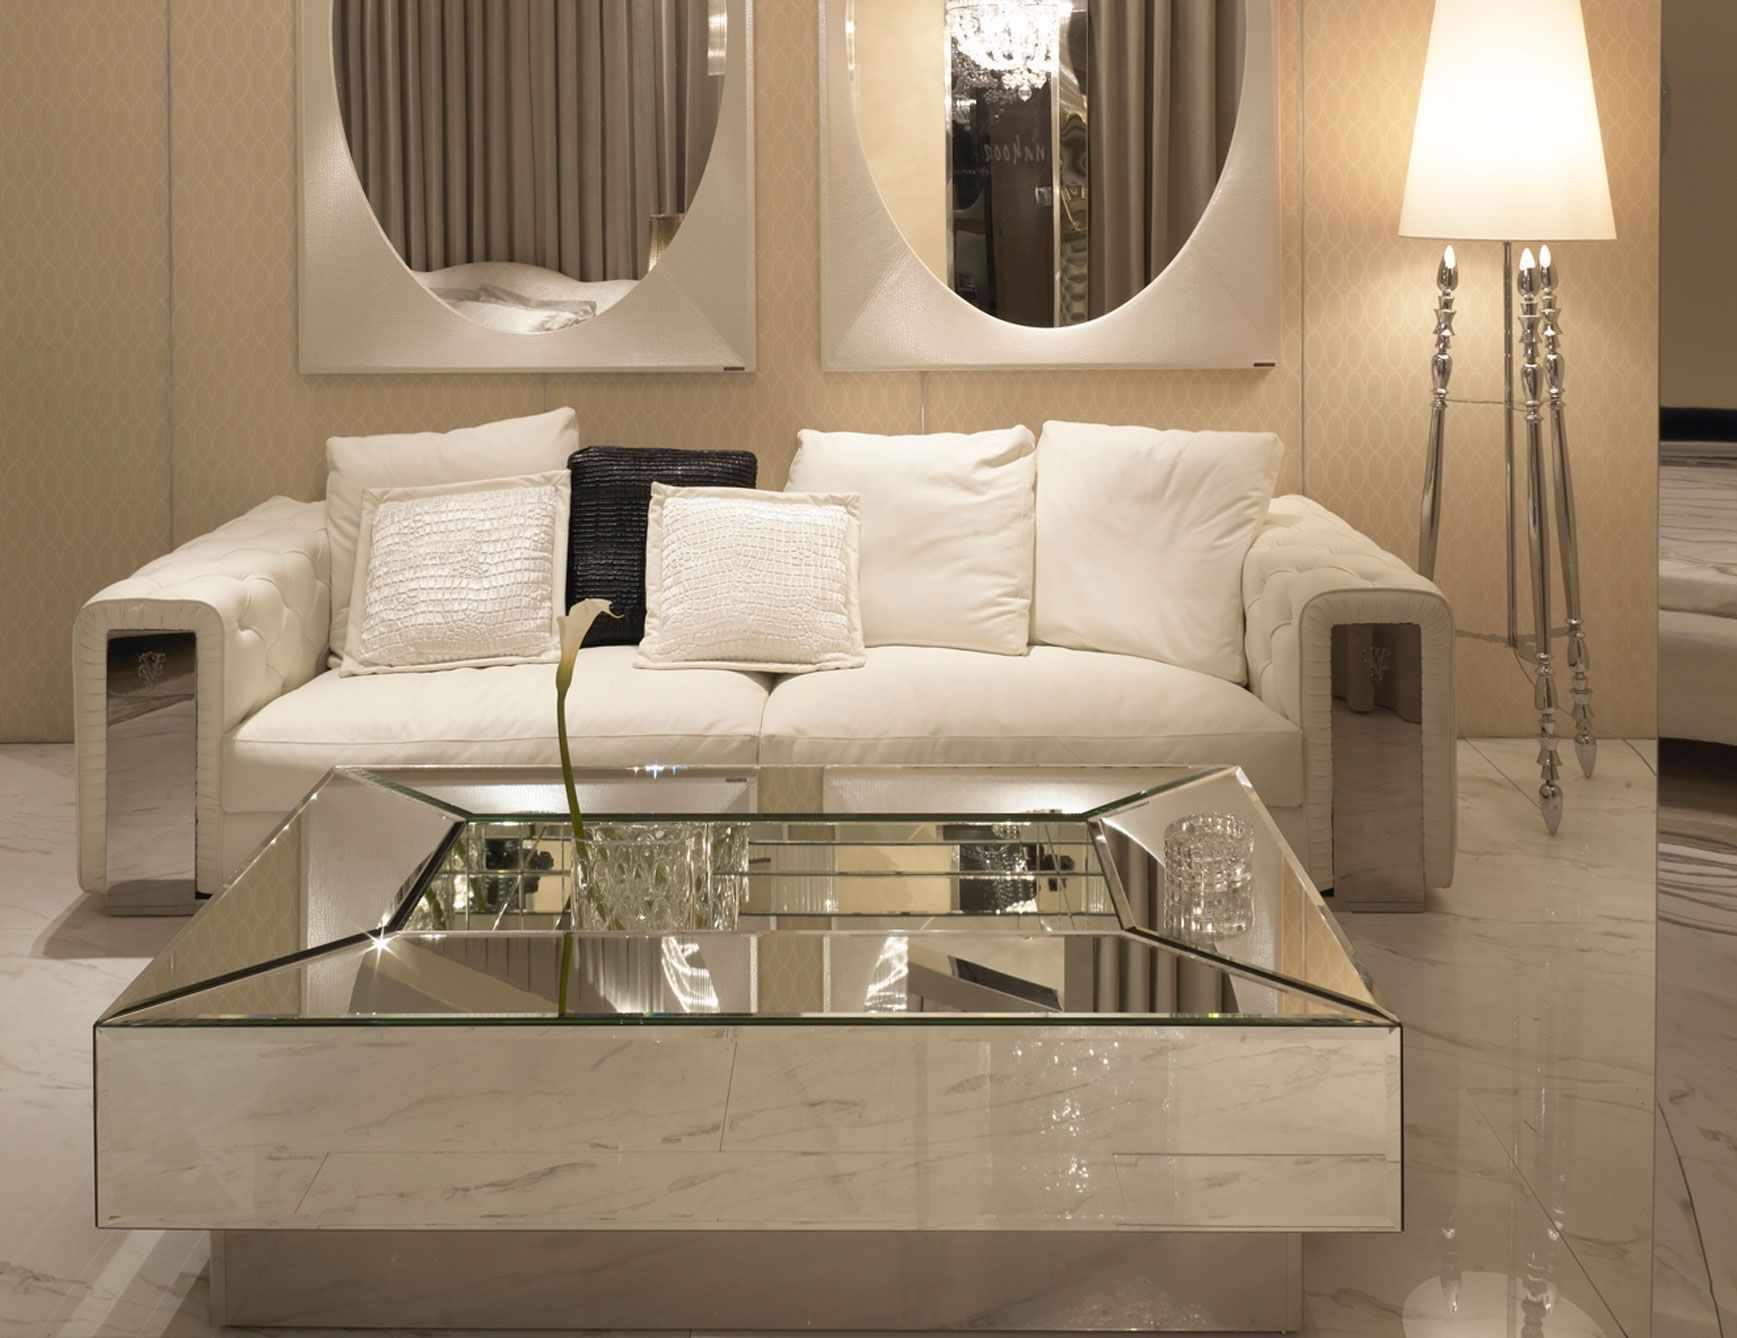 Mesmerizing Mirrored Coffee Table With Glass And Wood Combined within sizing 1737 X 1338